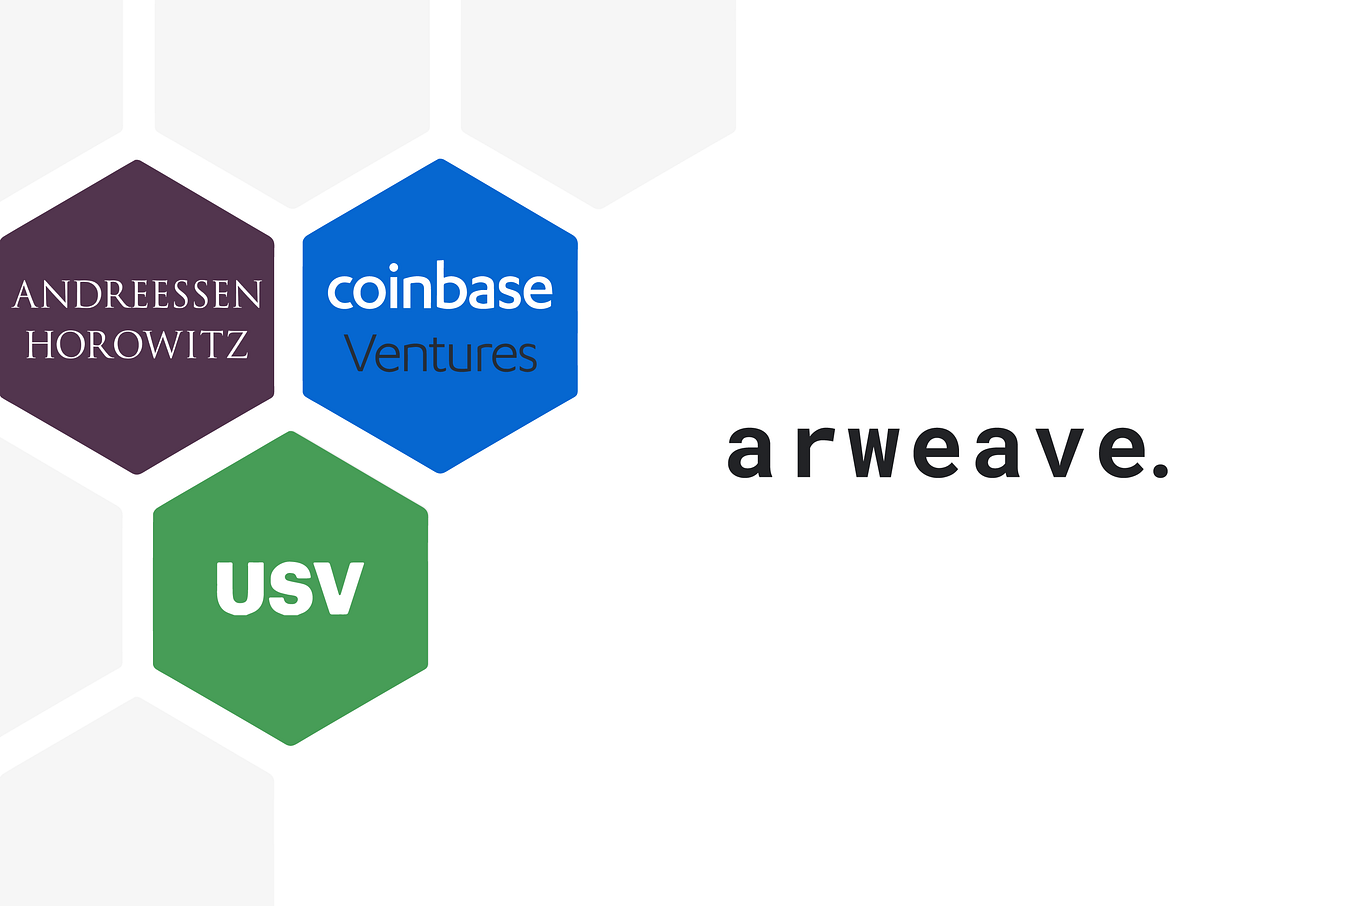 Arweave announces new funding from Andreessen Horowitz, USV, and Coinbase Ventures